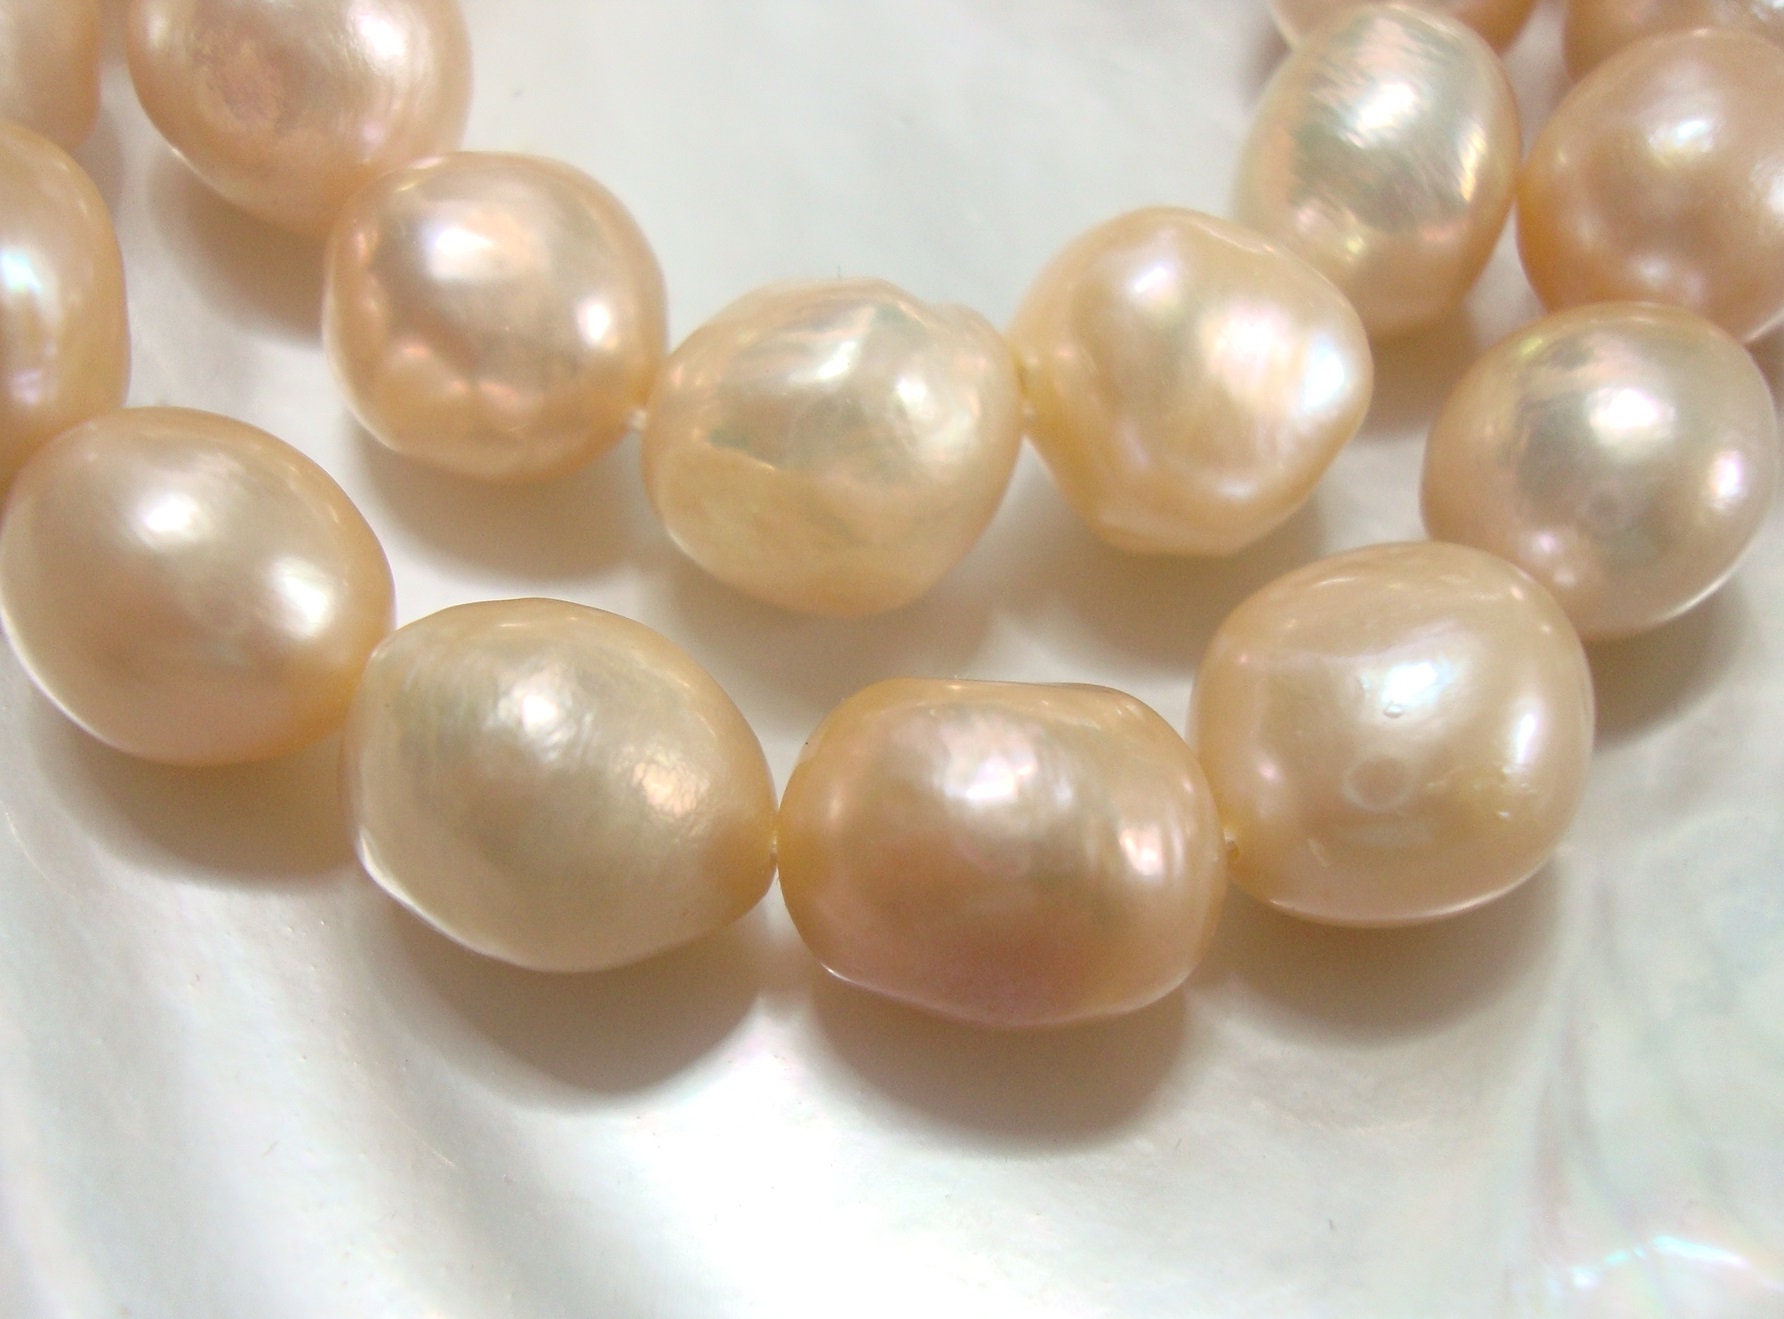 Very Pretty Ivory Button Freshwater Pearls - A Grain of Sand